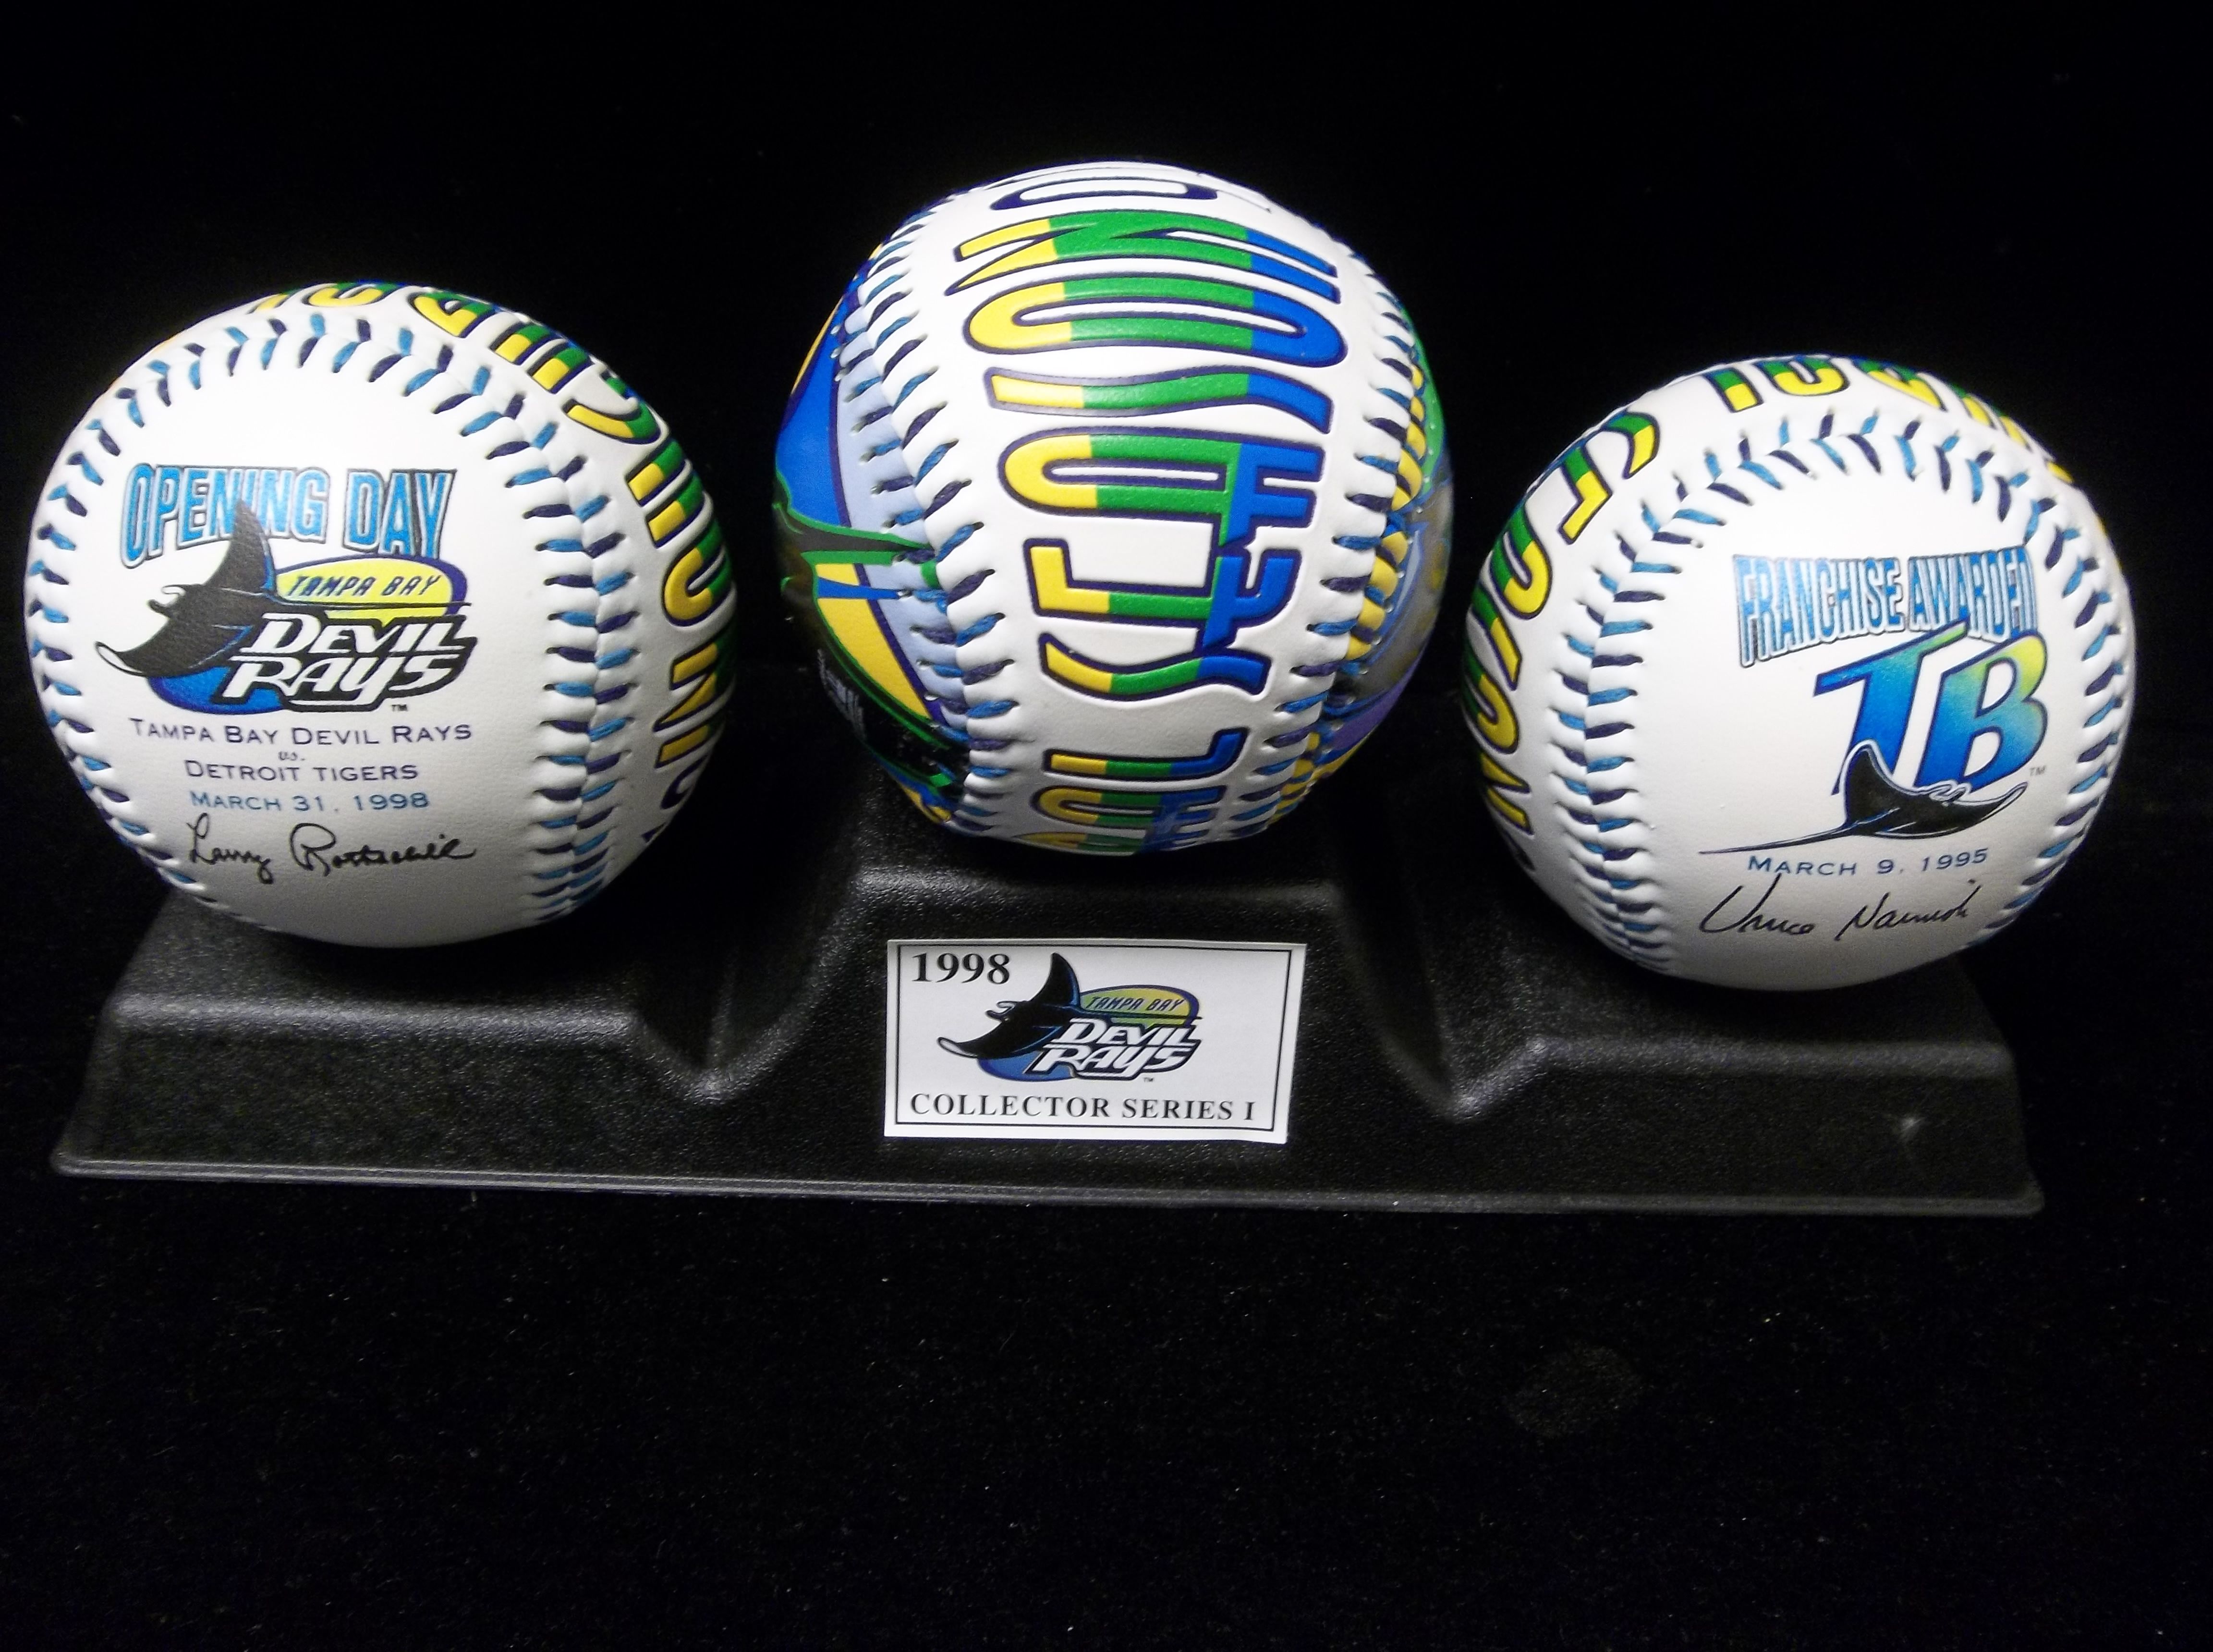 Tampa Bay Devil Rays 25th Anniversary 1998-2023 Thank You For The